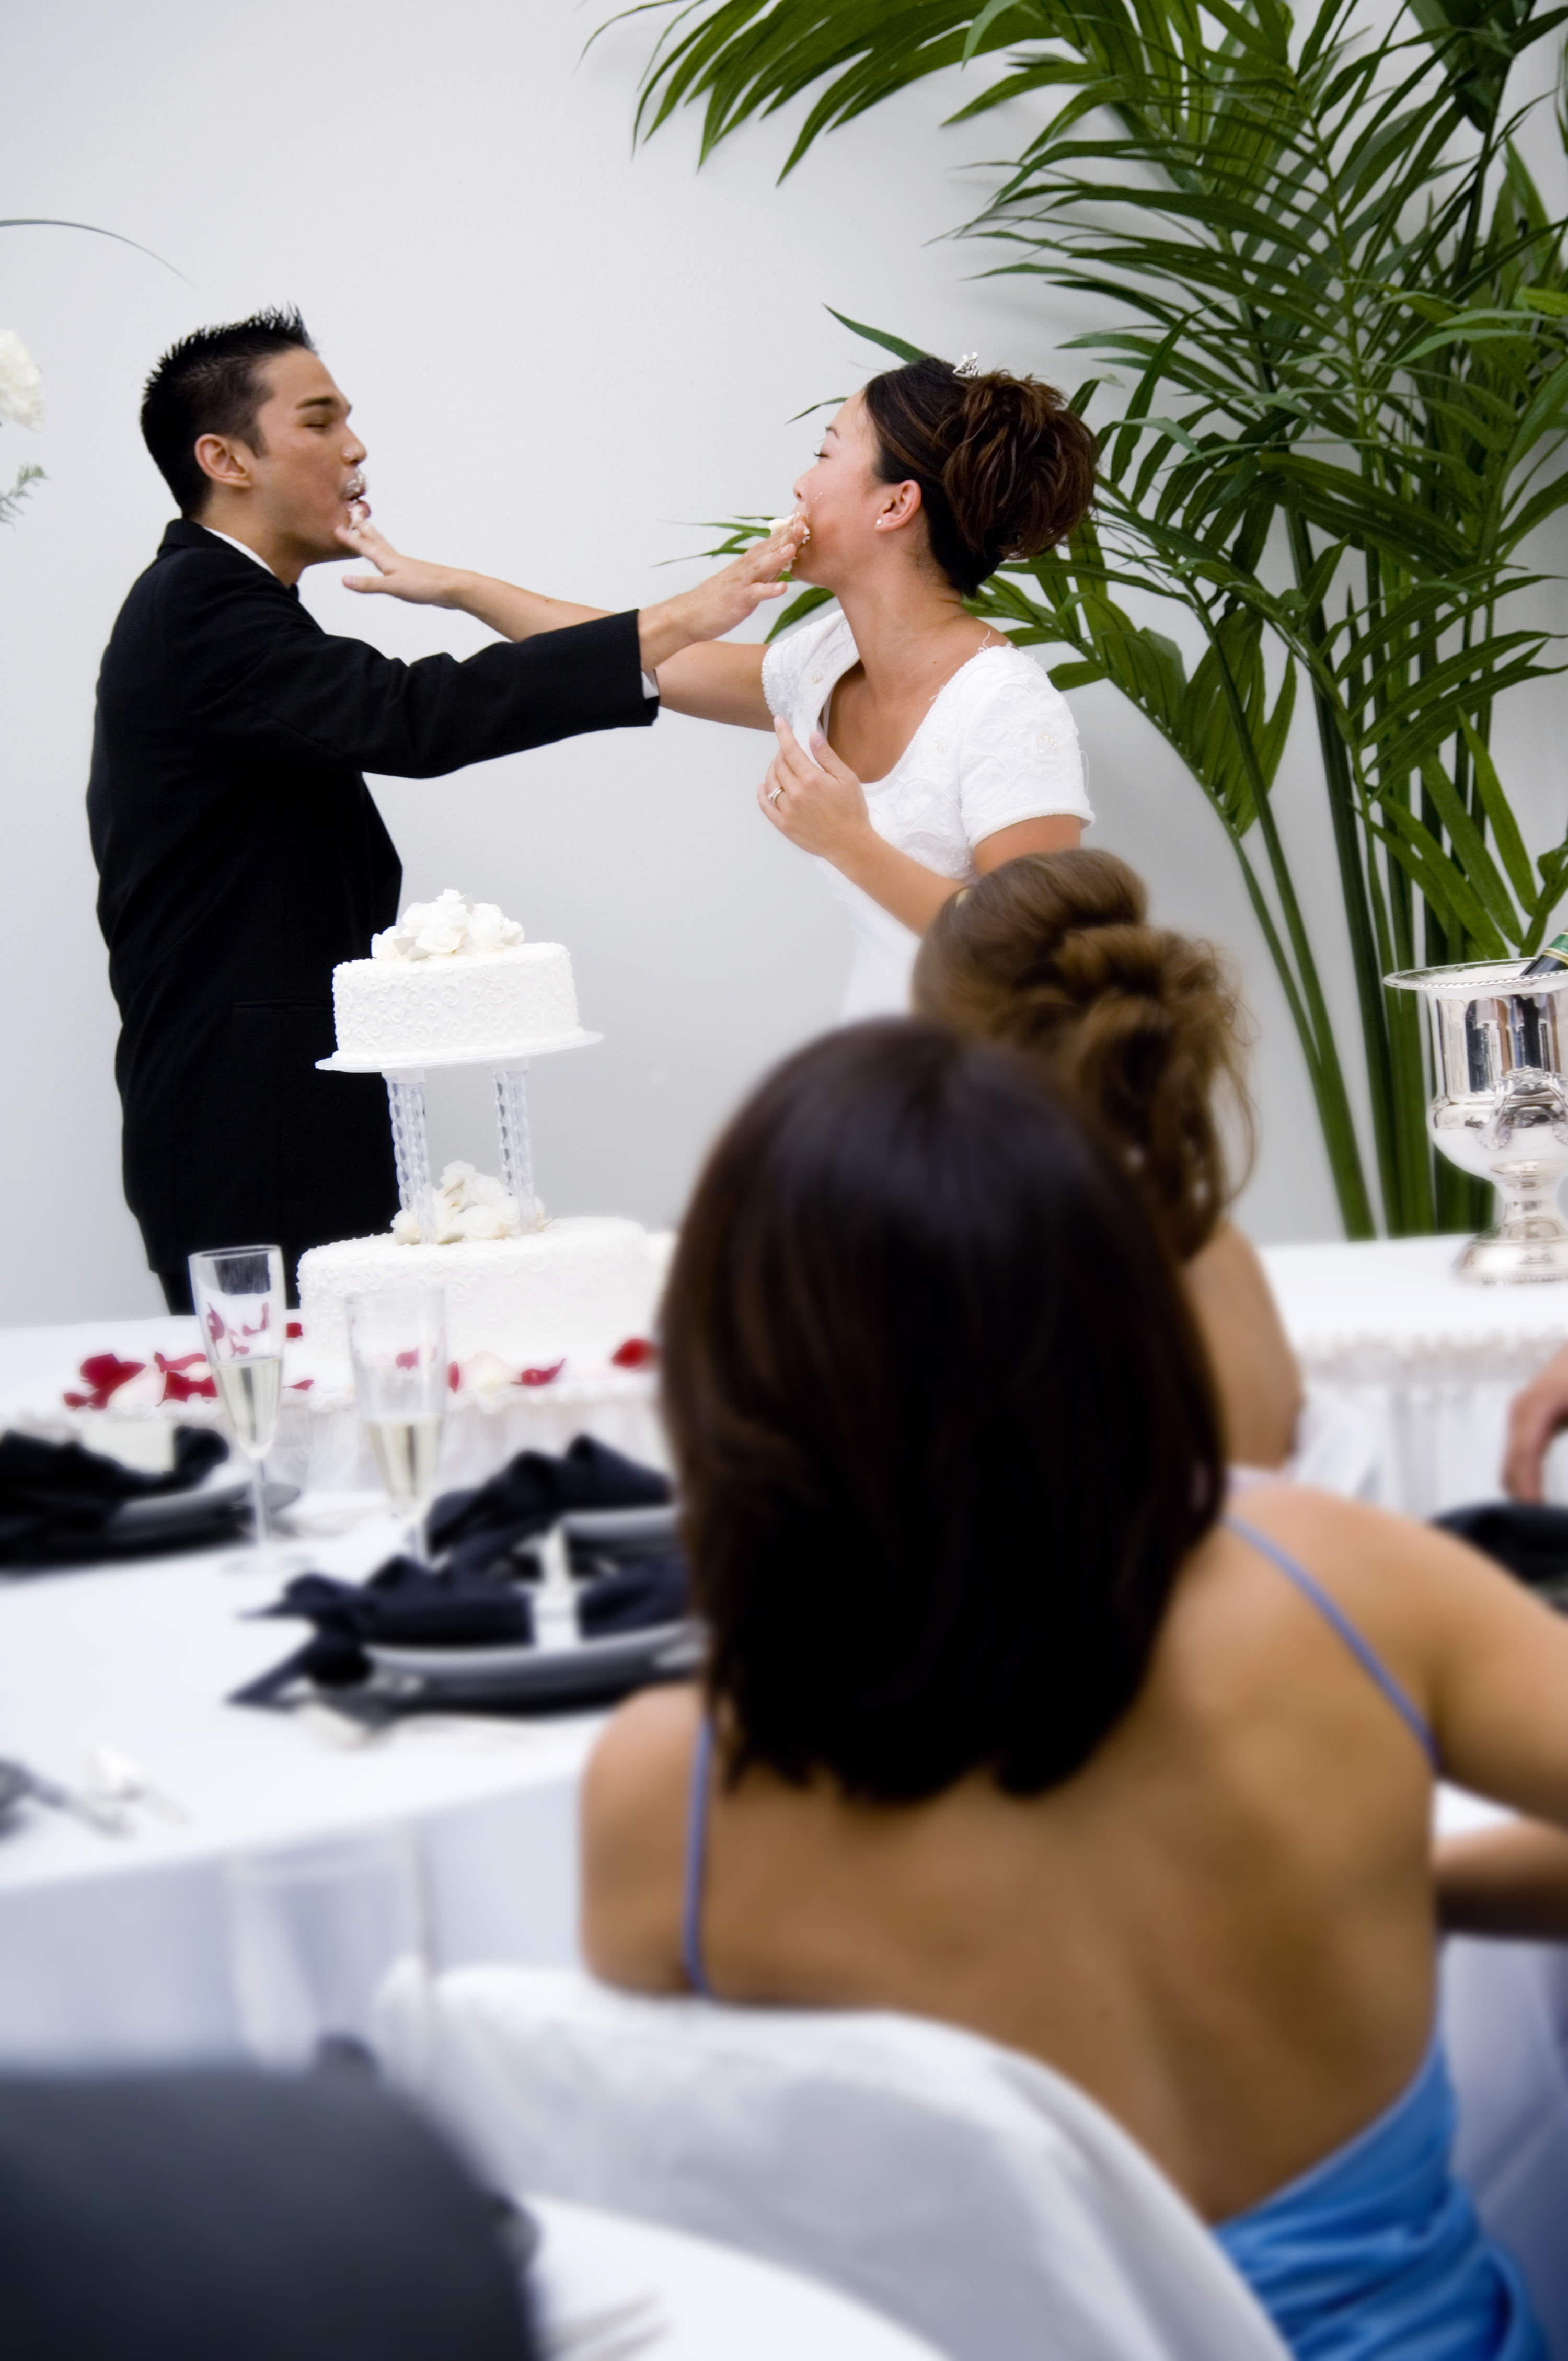 A groom and bride put wedding cake on each other&#x27;s faces at their wedding reception